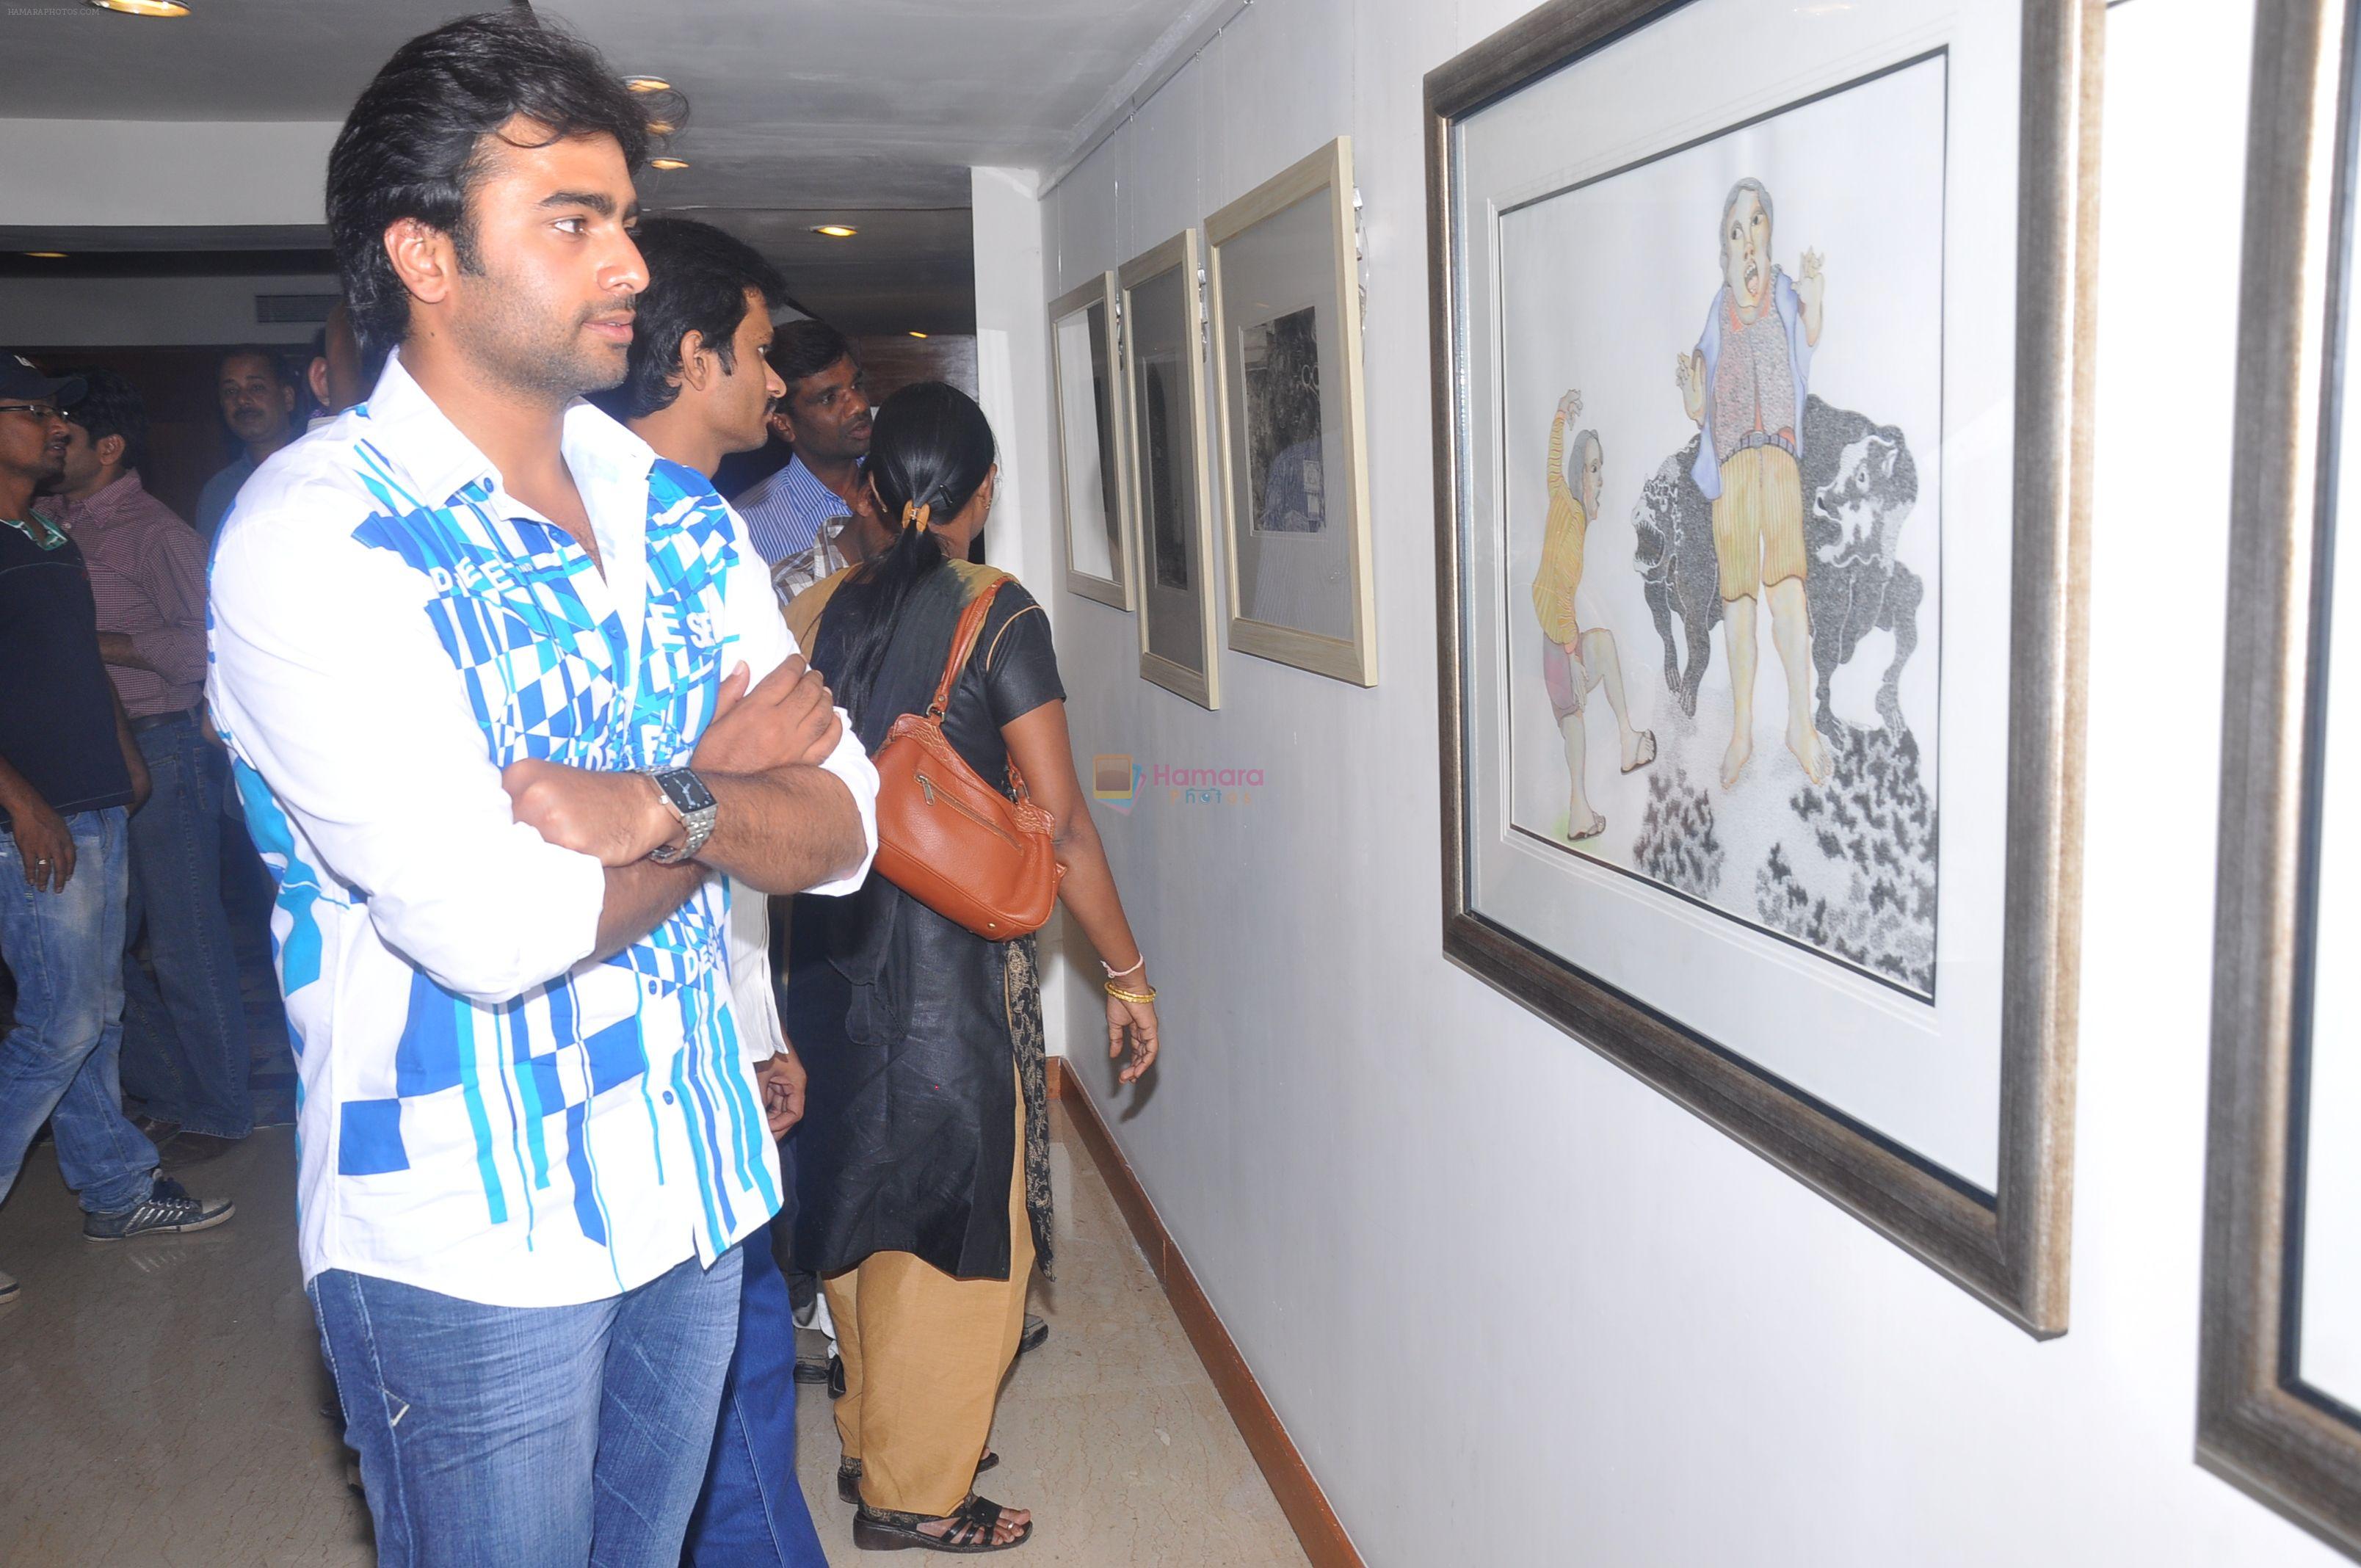 Nara Rohit attends Muse the Art Gallery Group Show Multiversal at Marriot Hotel on 16th September 2011